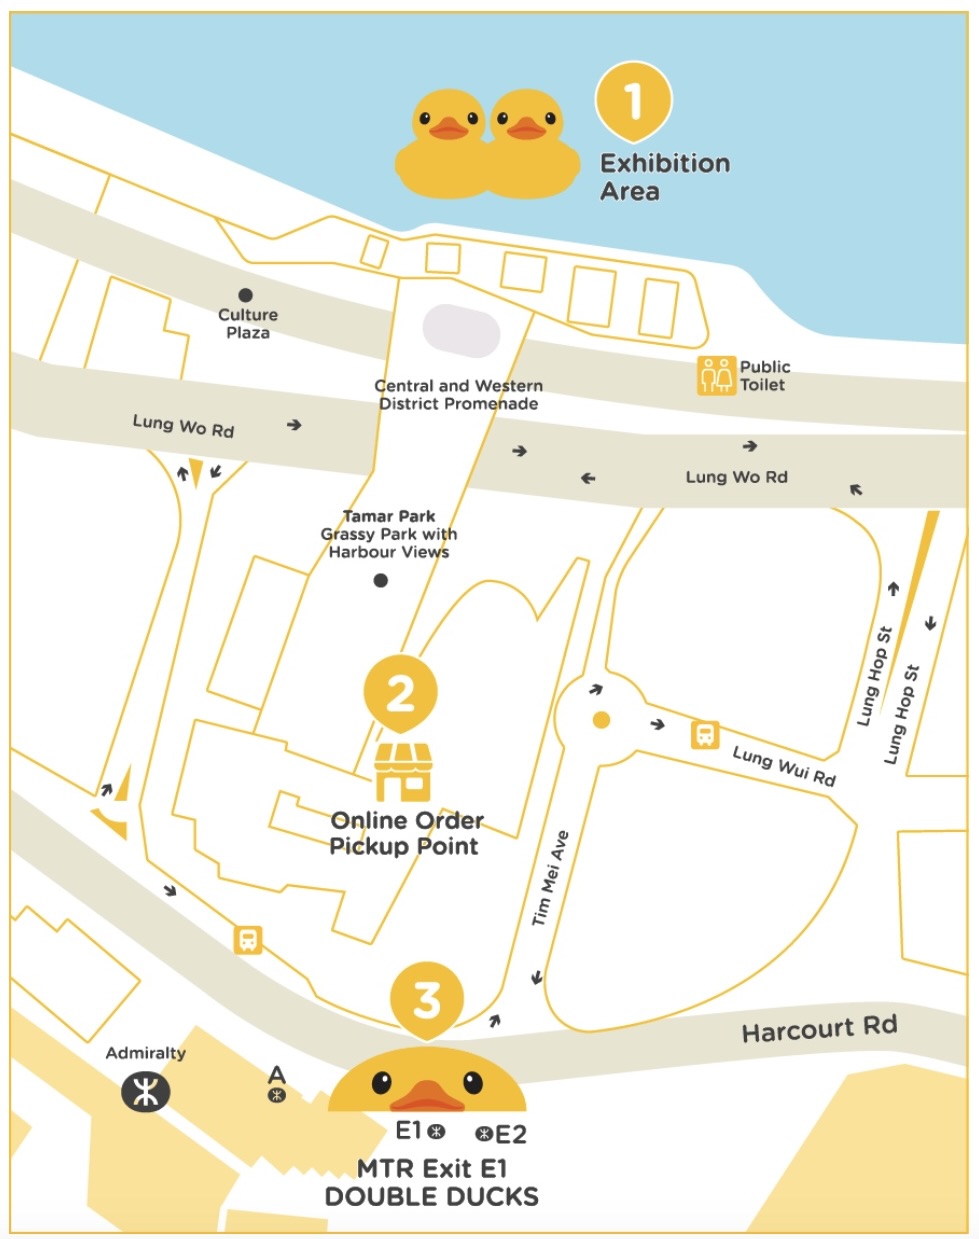 The route map for the Rubber Duck Project exhibition.